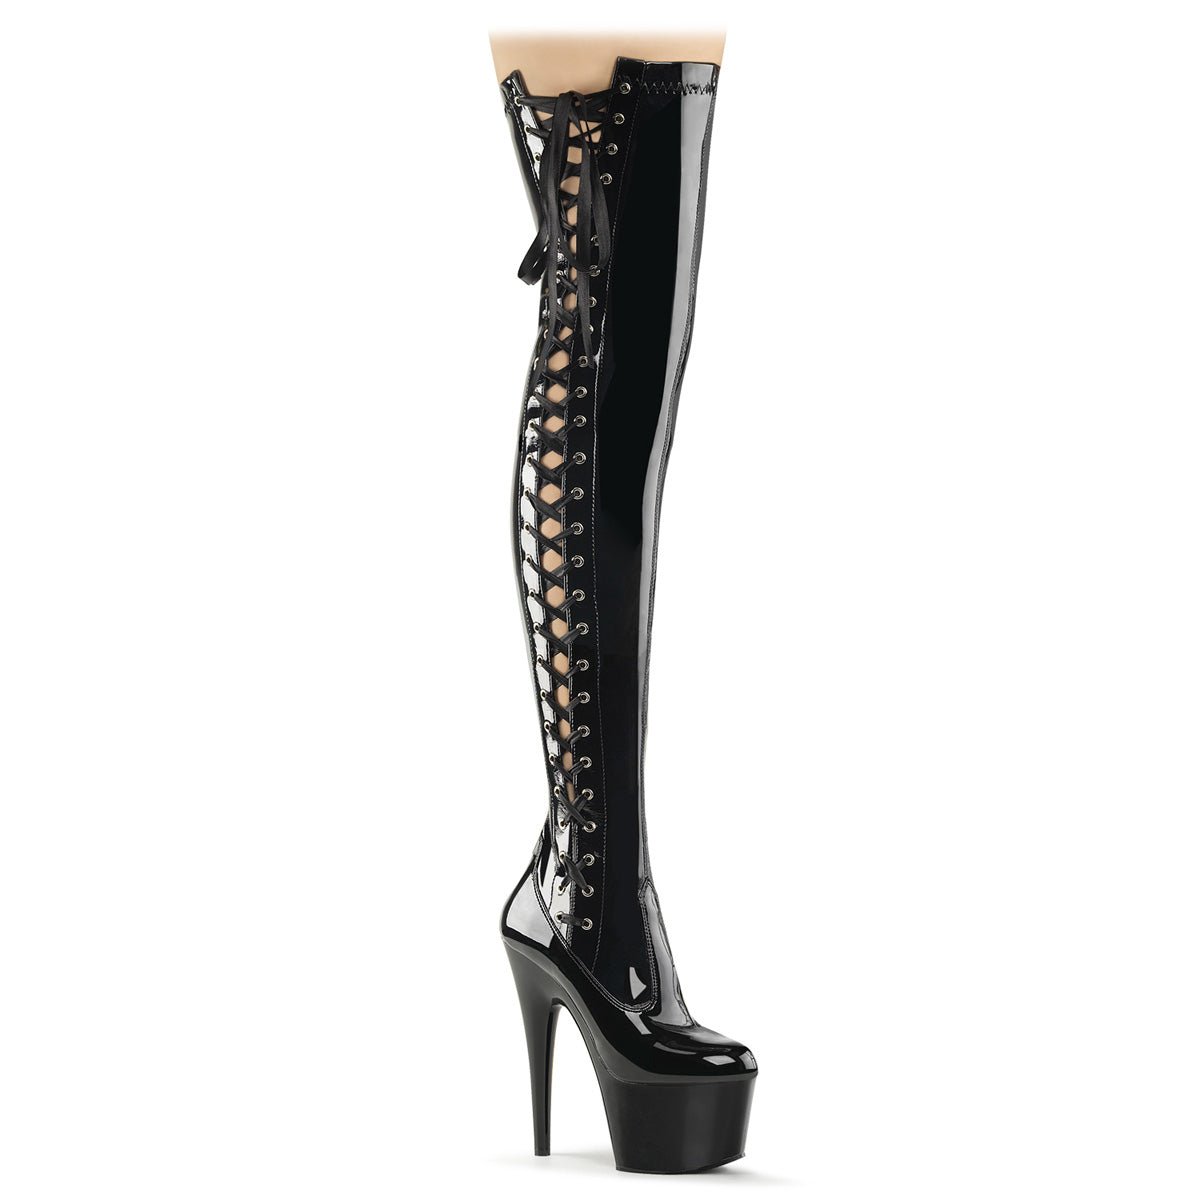 Clearance Pleaser Adore 3050 Black Size 3UK/6USA - From Clearance Sold By Alternative Footwear